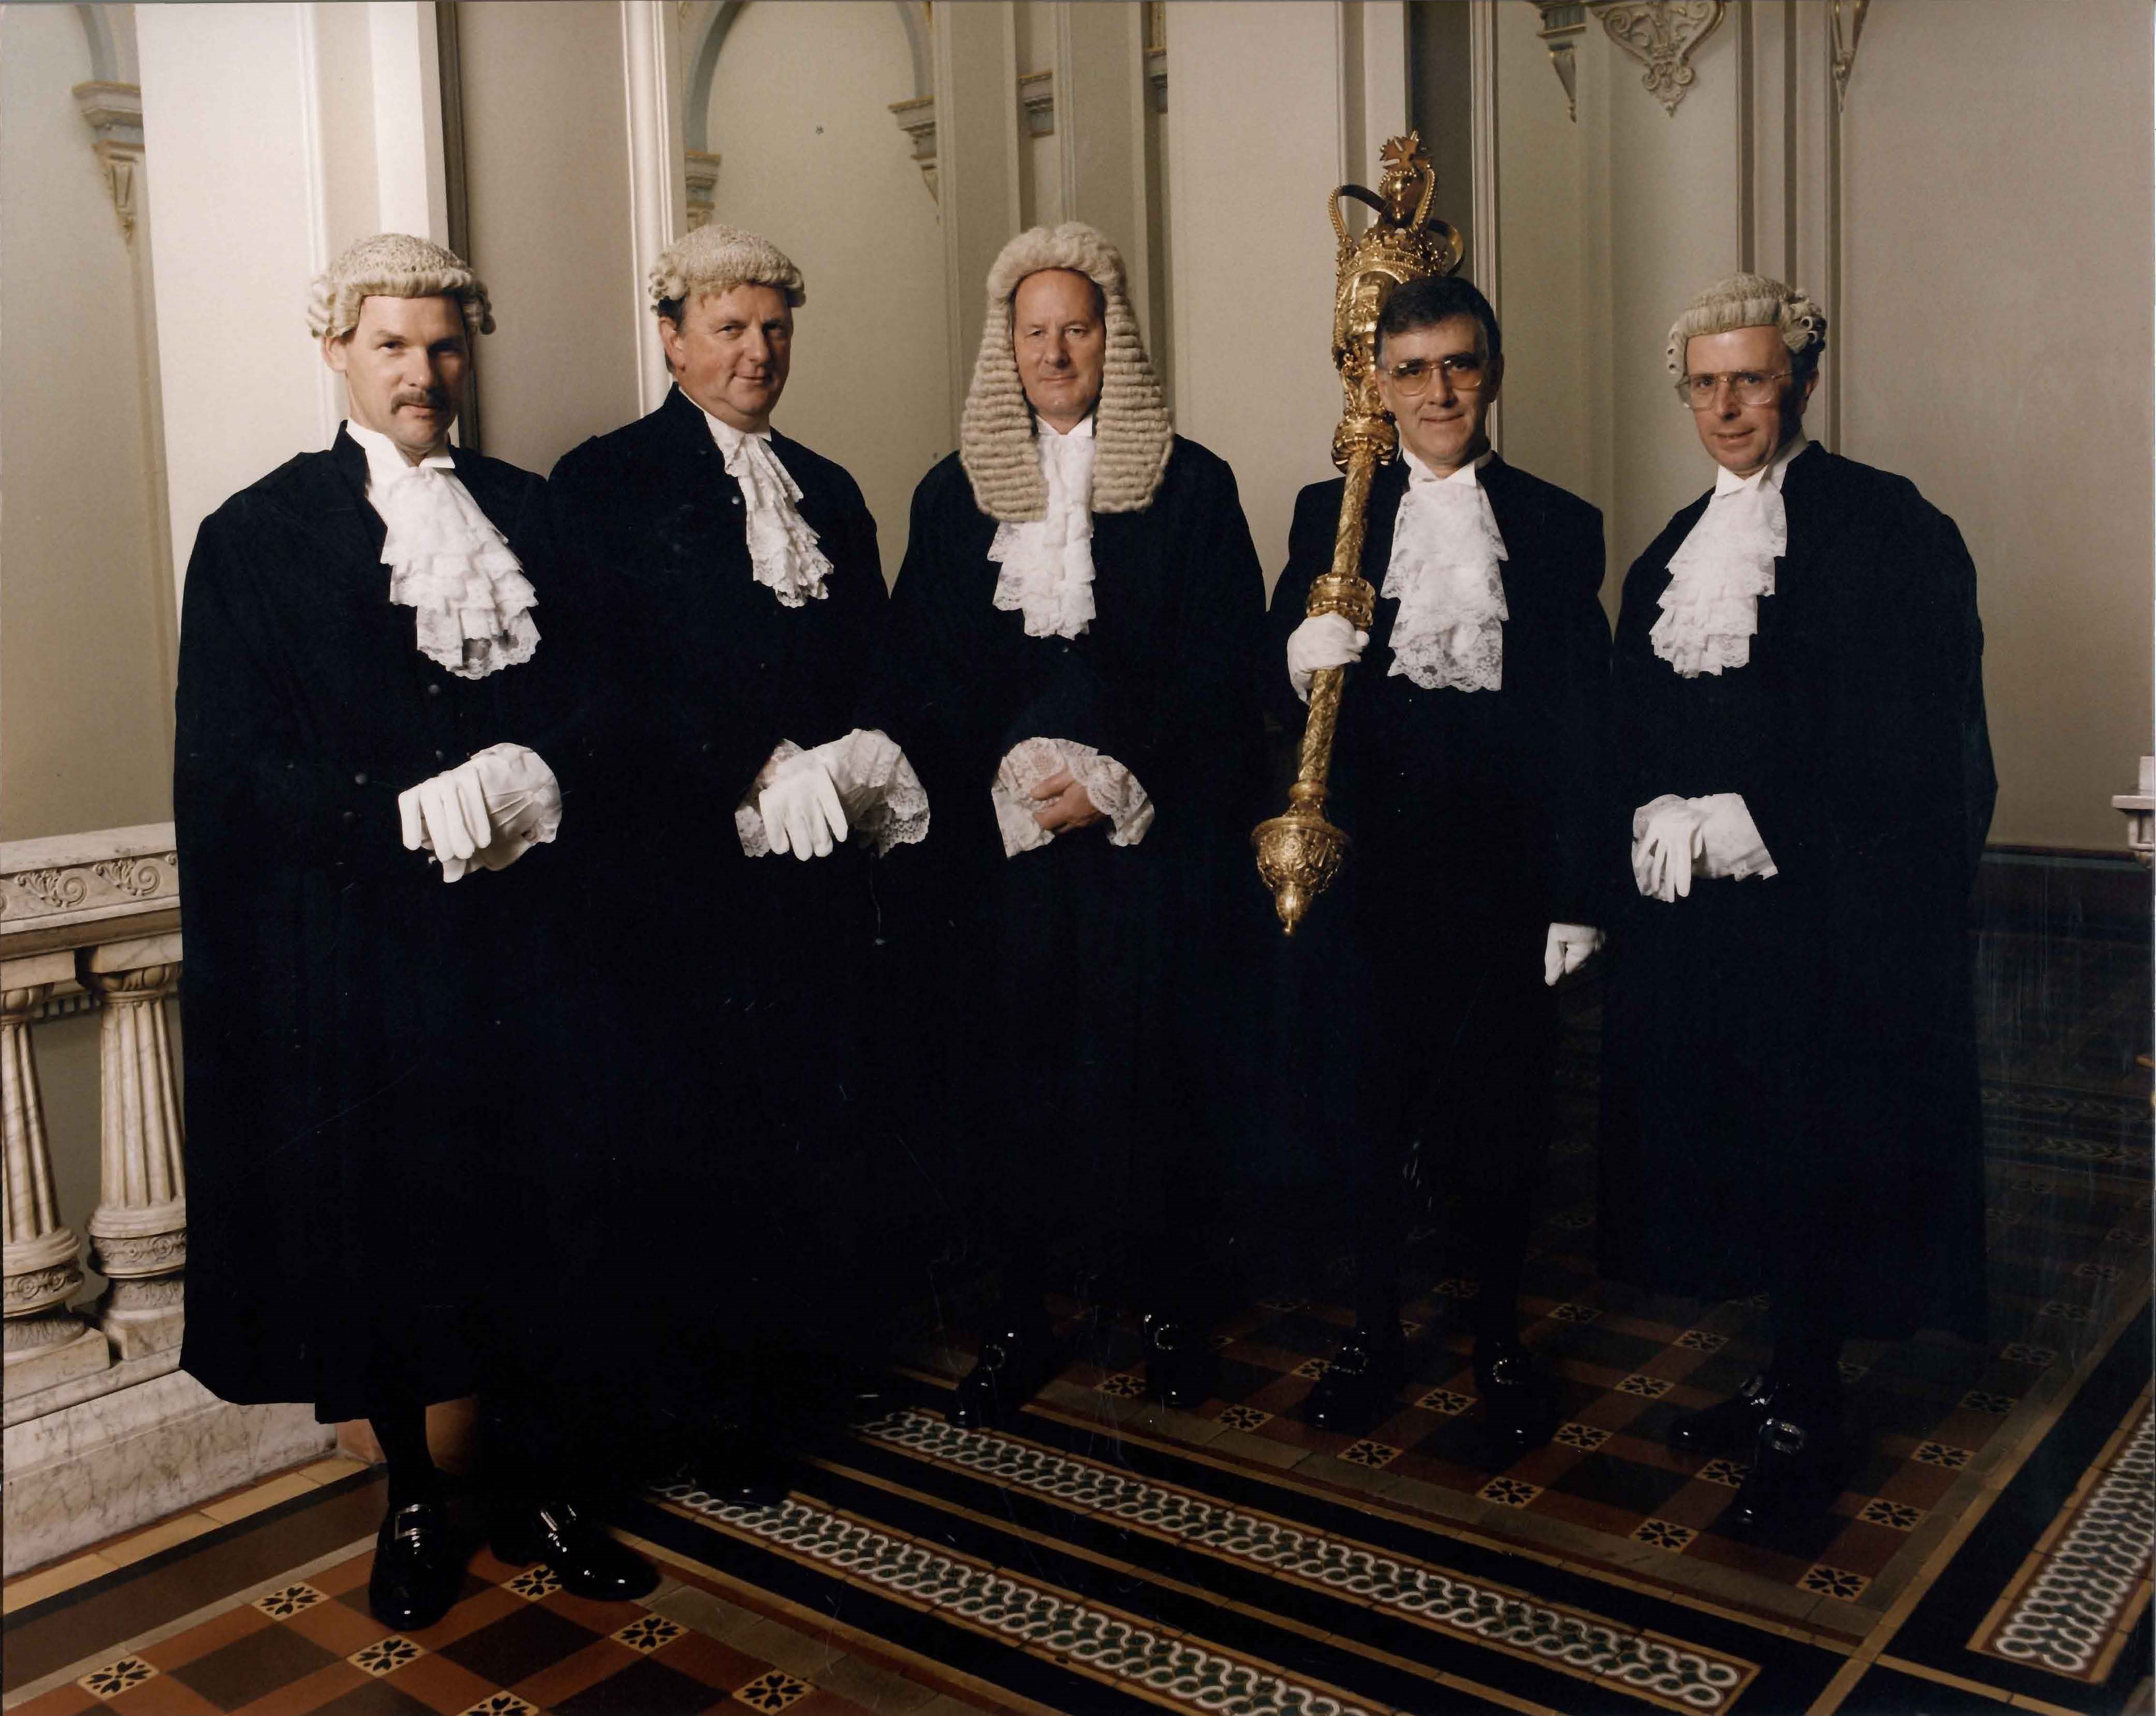 The Speaker, Clerk, Deputy Clerk, Assistant Clerk and Serjeant-at-Arms of the 53rd Parliament in wigs and gowns, 20 May 1998. Photograph by Chris Cassar. Courtesy of Parliament of Victoria.